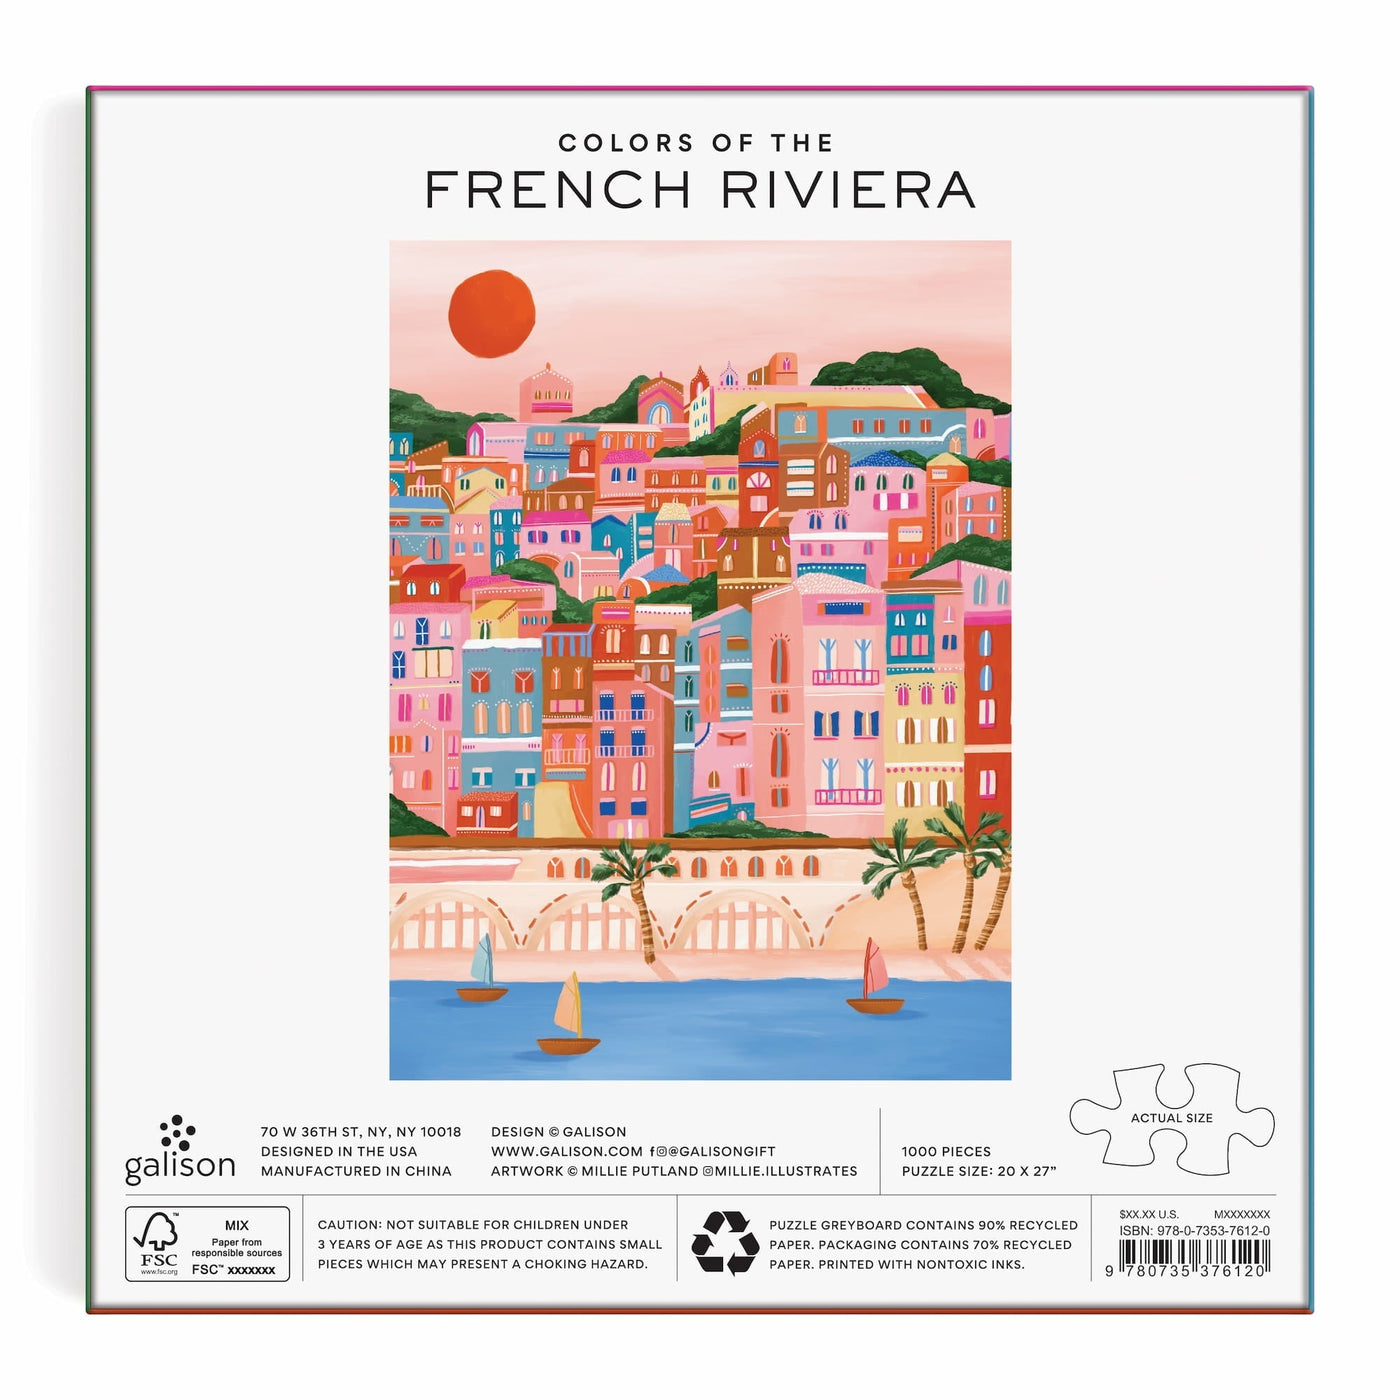 Colors Of The French Riviera | 1,000 Piece Jigsaw Puzzle